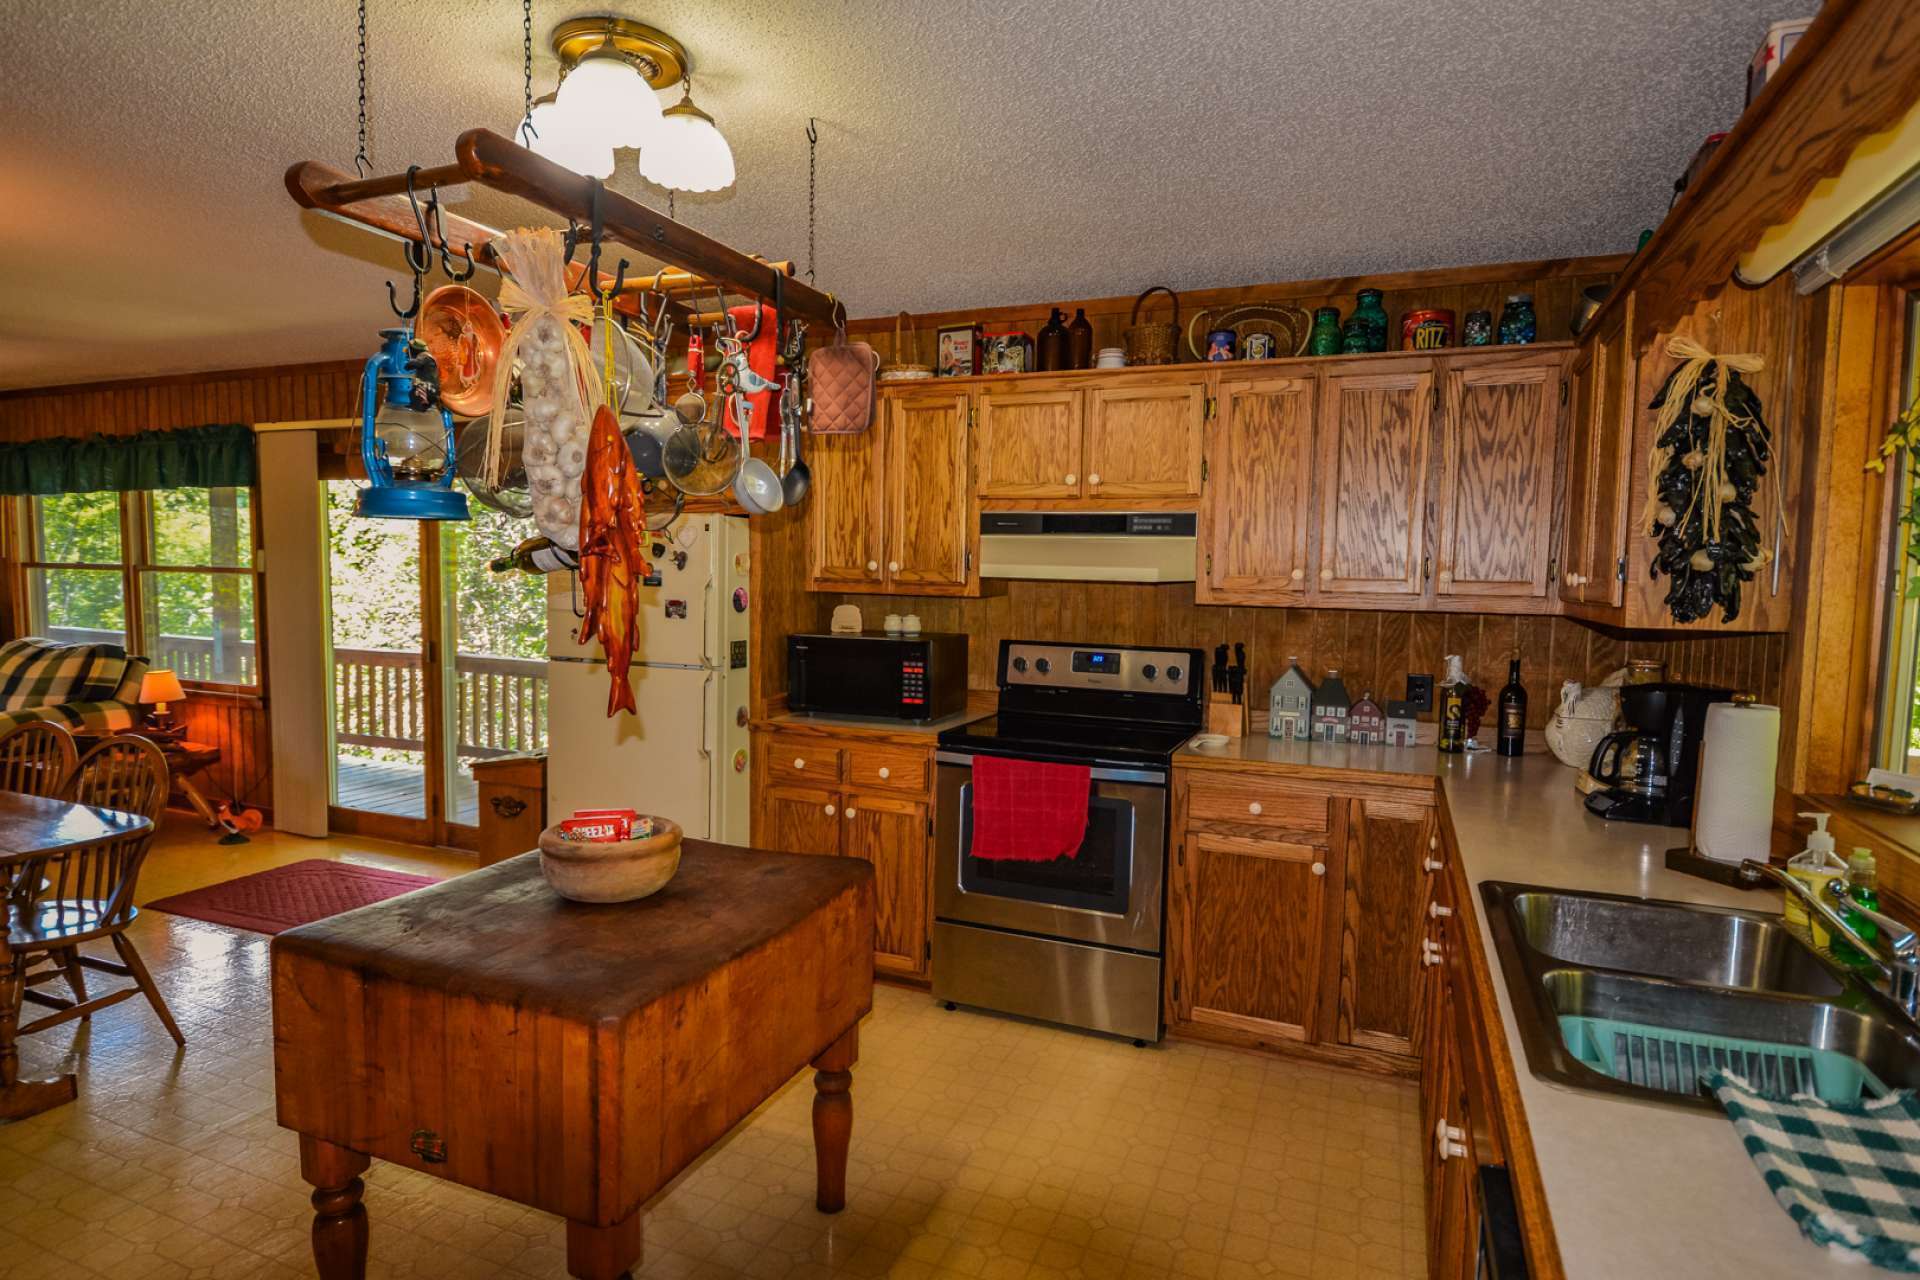 Easily accessible from the living area, the spacious kitchen area offers plenty of work and storage space.